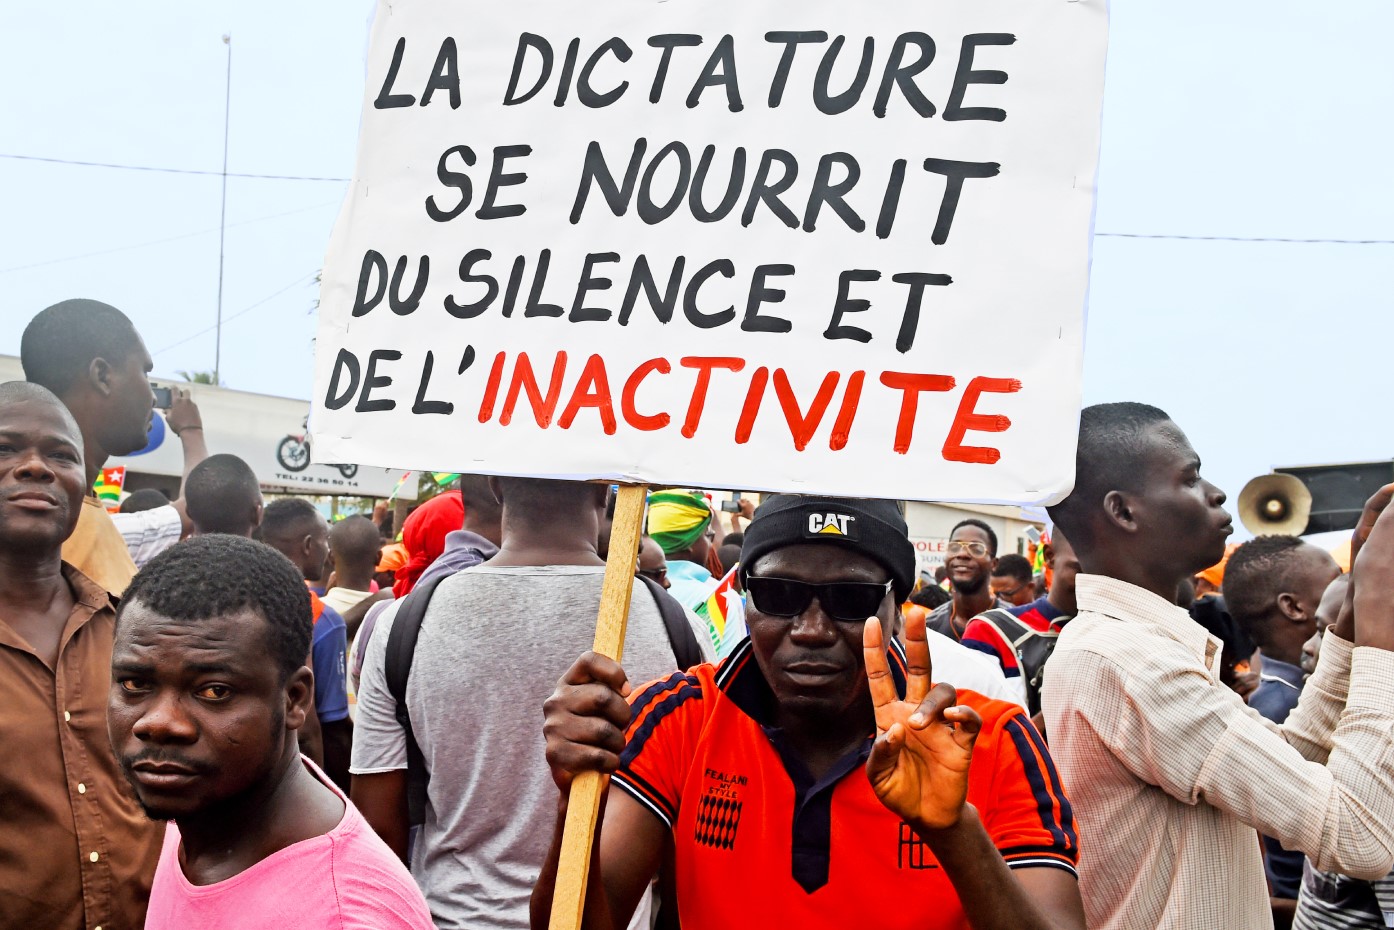 Protesters carry a placard reading “dictatorship feeds on silence and inactivity”